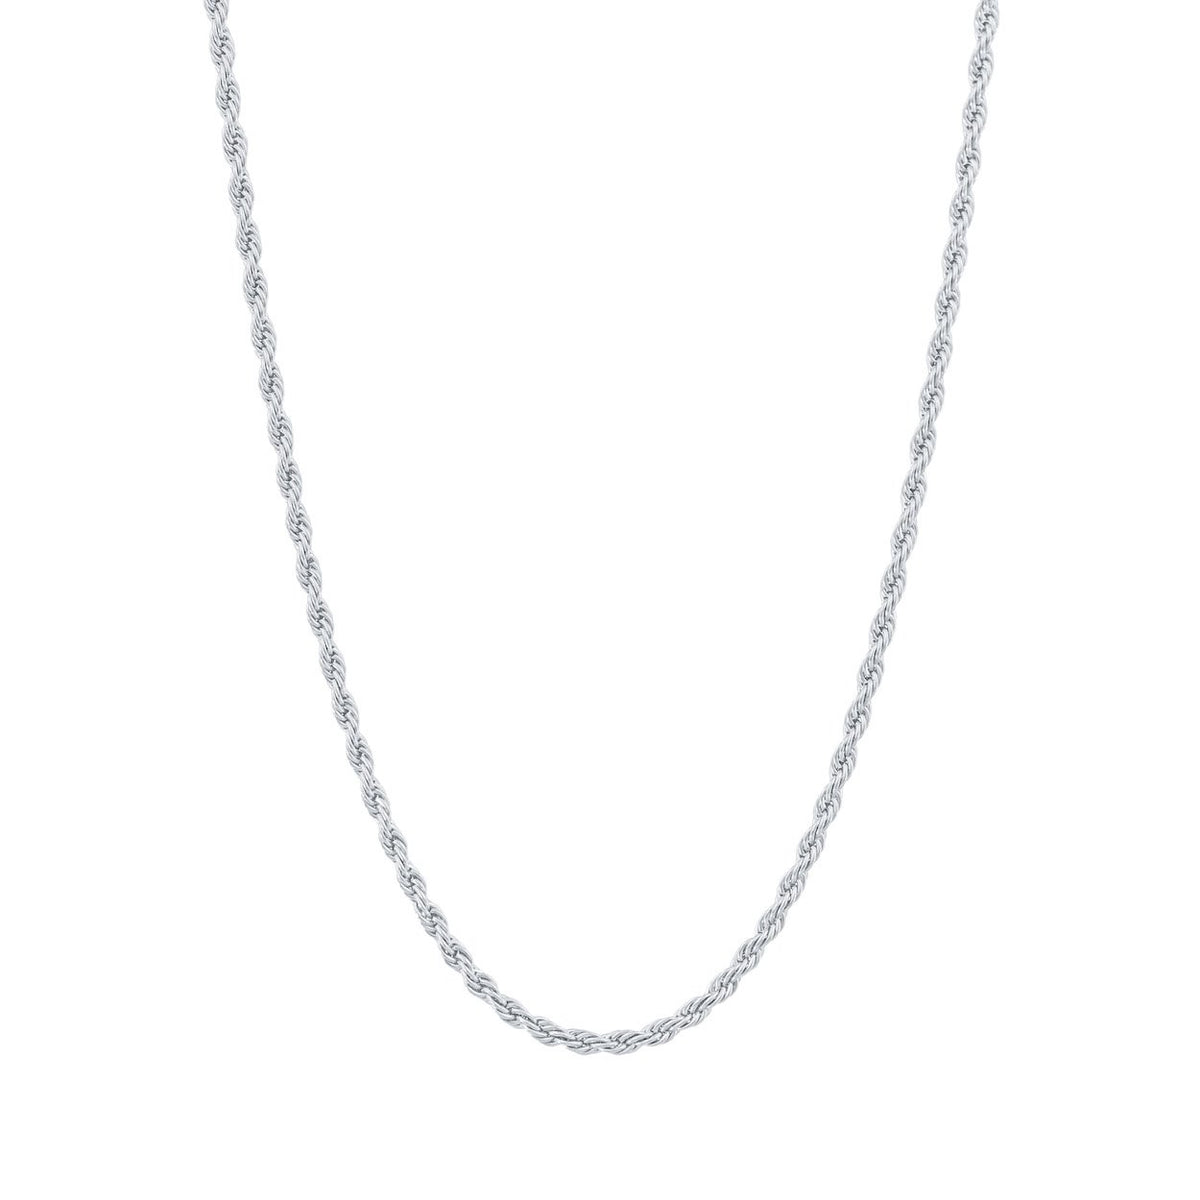 ROPE CHAIN IN WHITE GOLD (2MM)